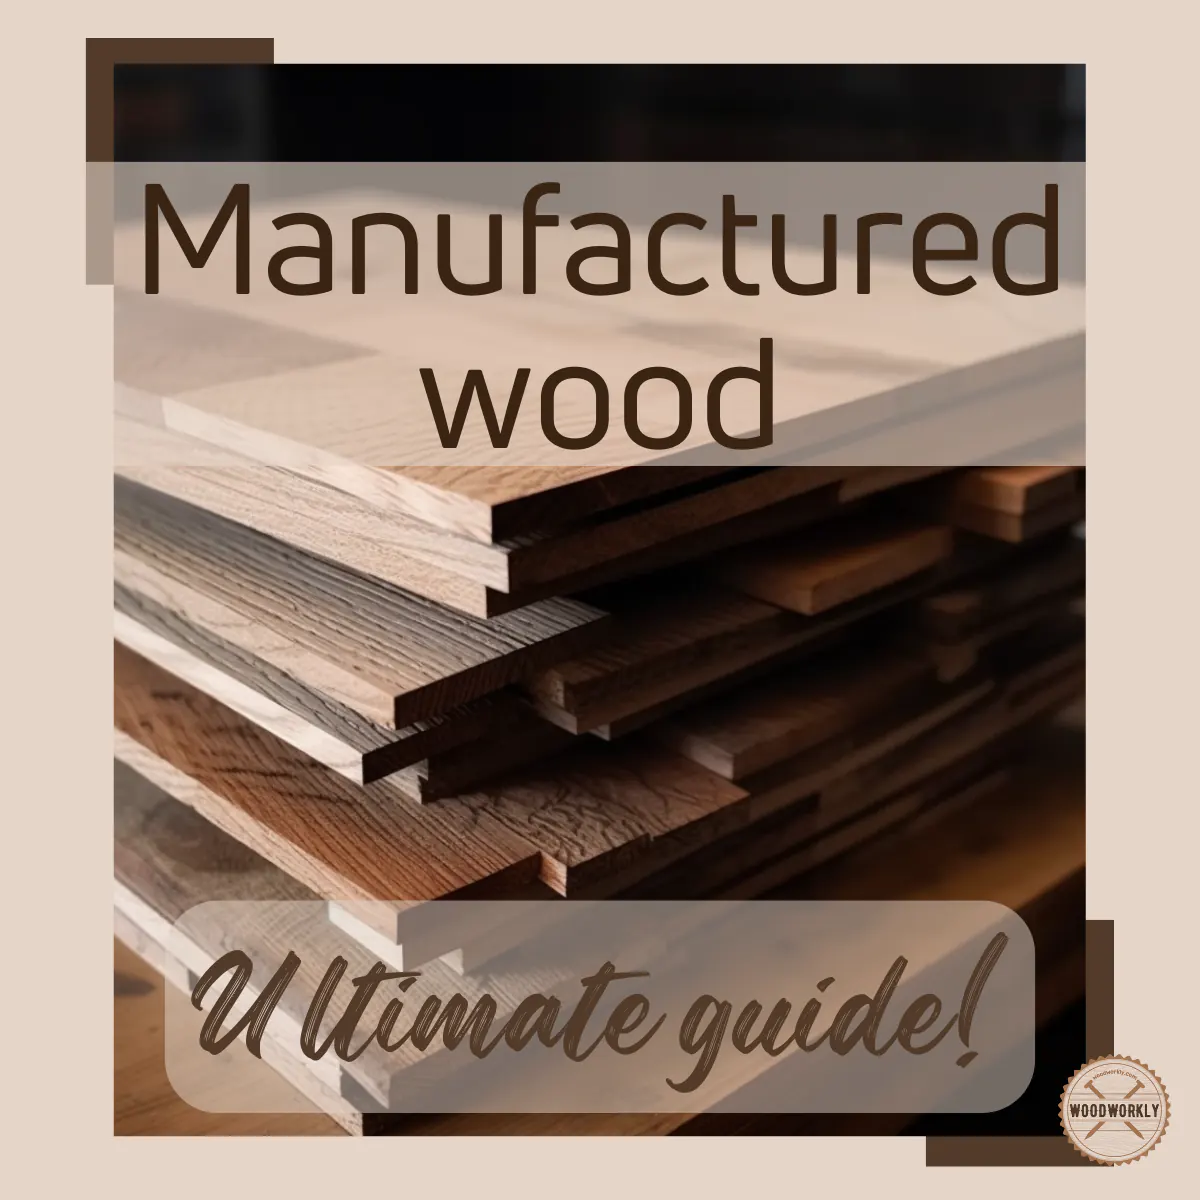 what is Manufactured wood